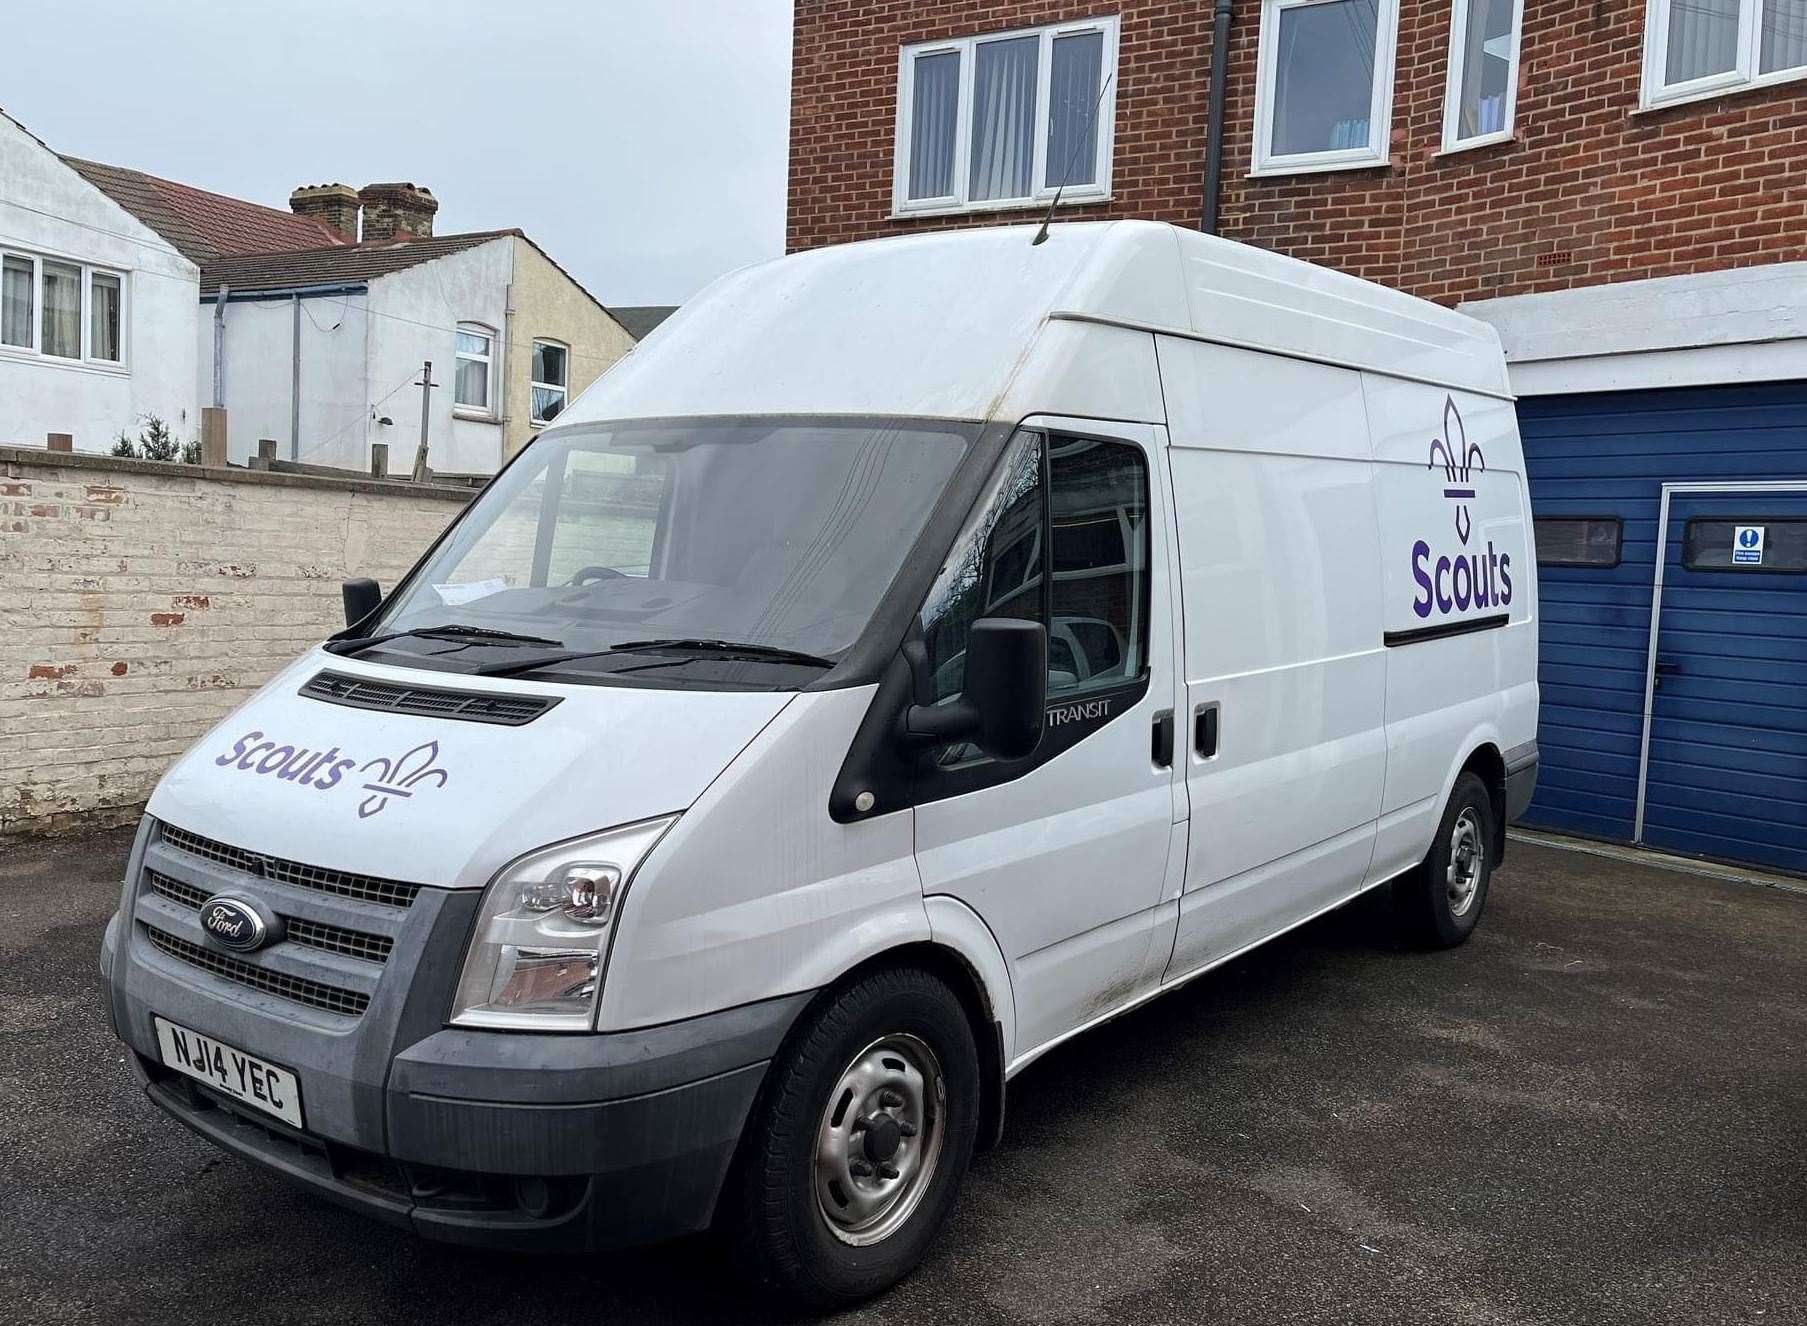 The Ford Transit van has been missing since Monday. Picture: Angela Palmer